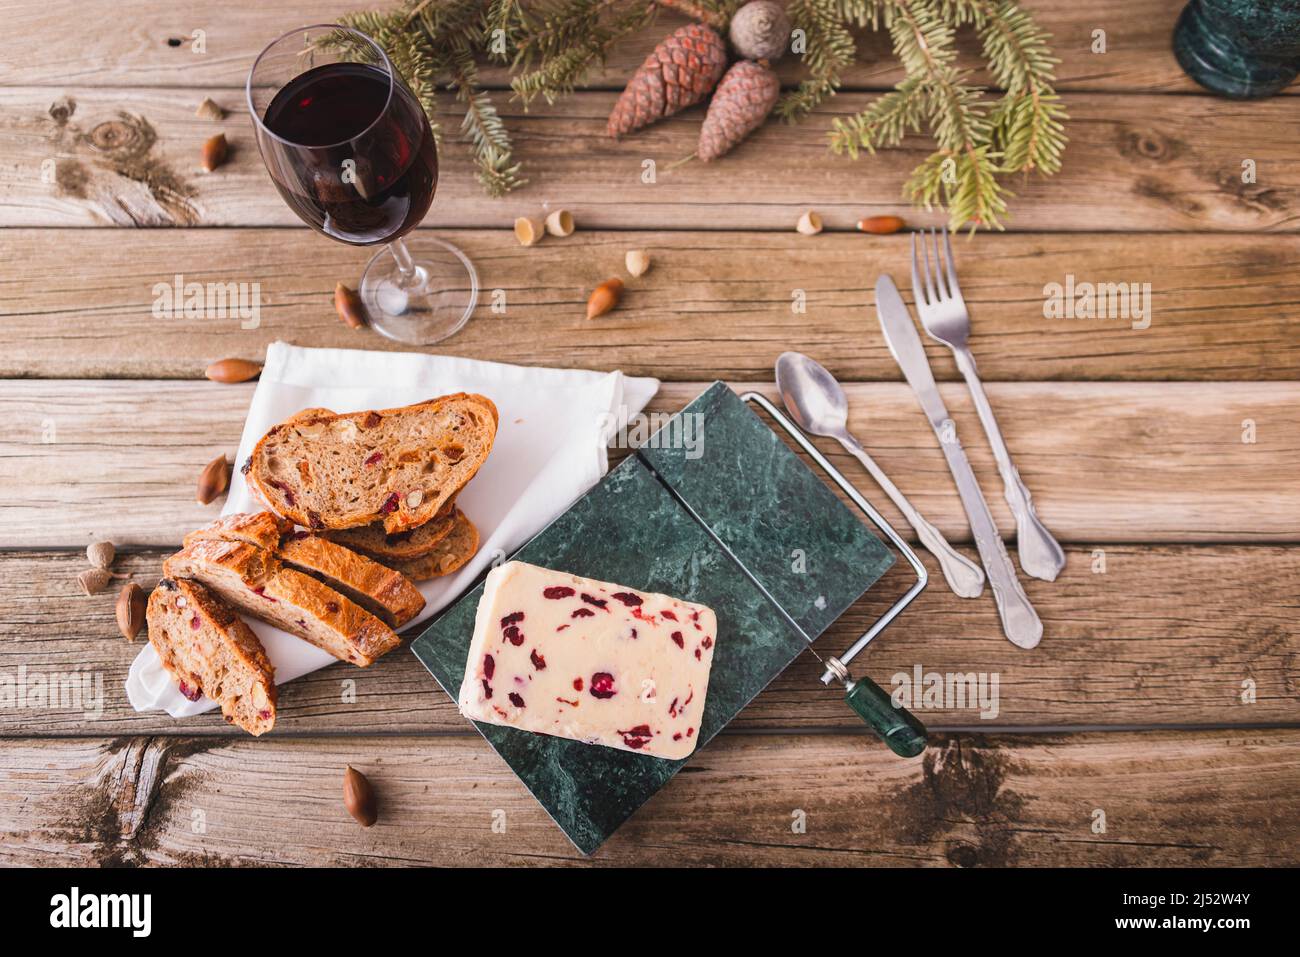 Delicious British Cheddar cheese with cranberry on a marble cheese cutting table. Stock Photo